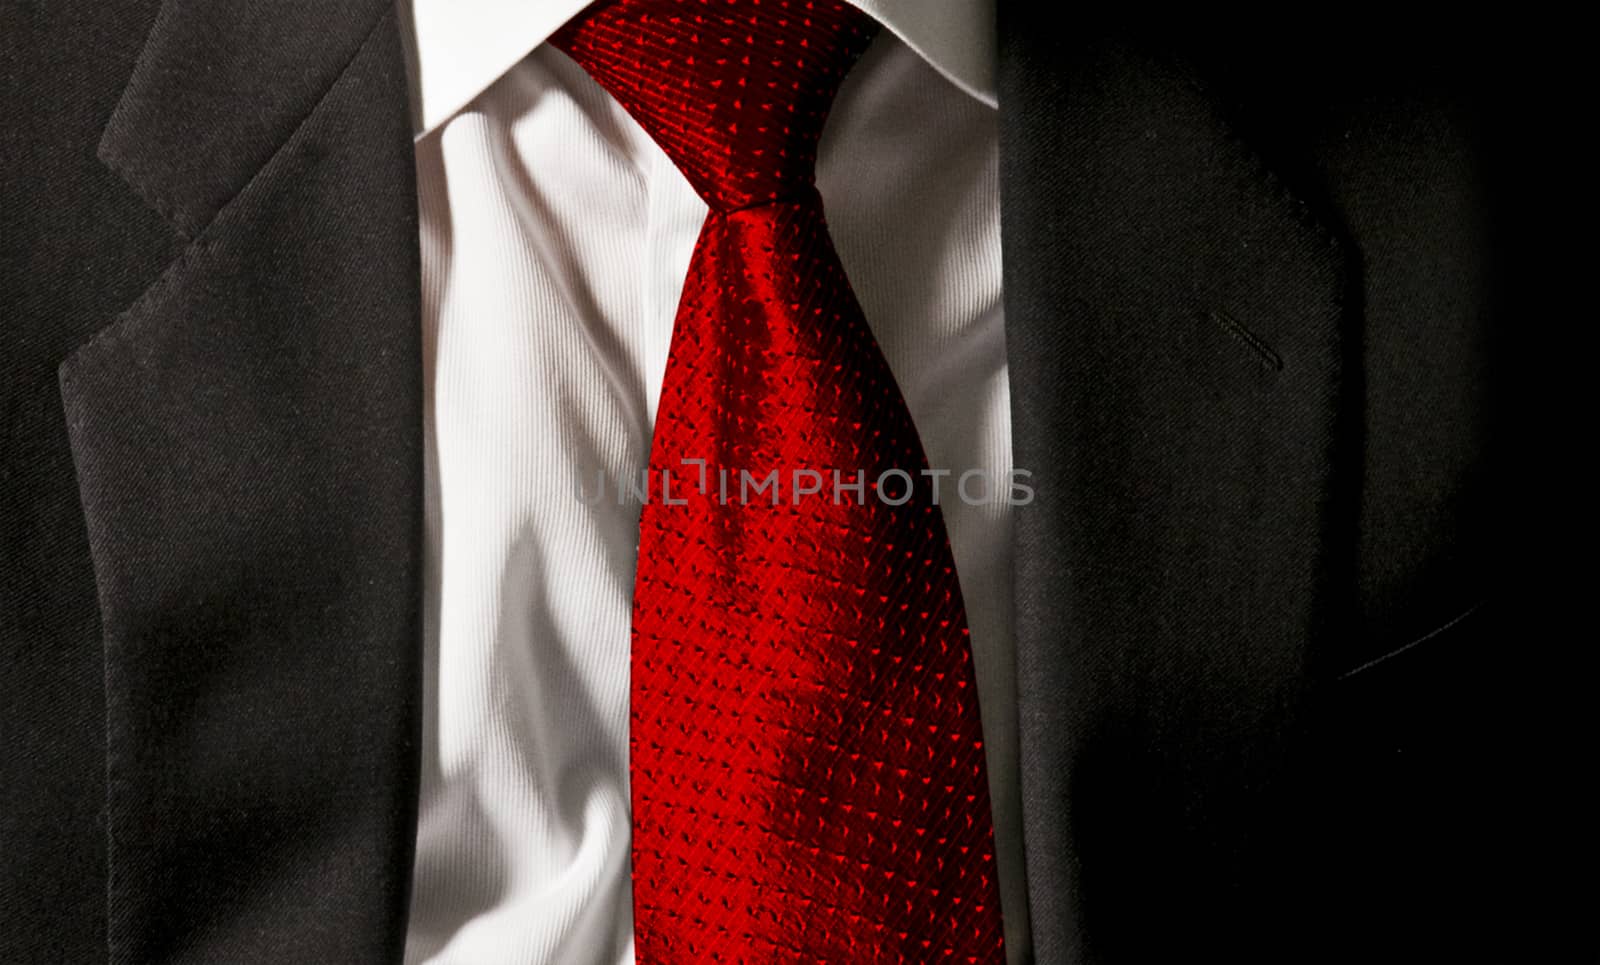 The boss's tie. The businessman is wearing his dark gray jacket on the white shirt with a gaudy red tie